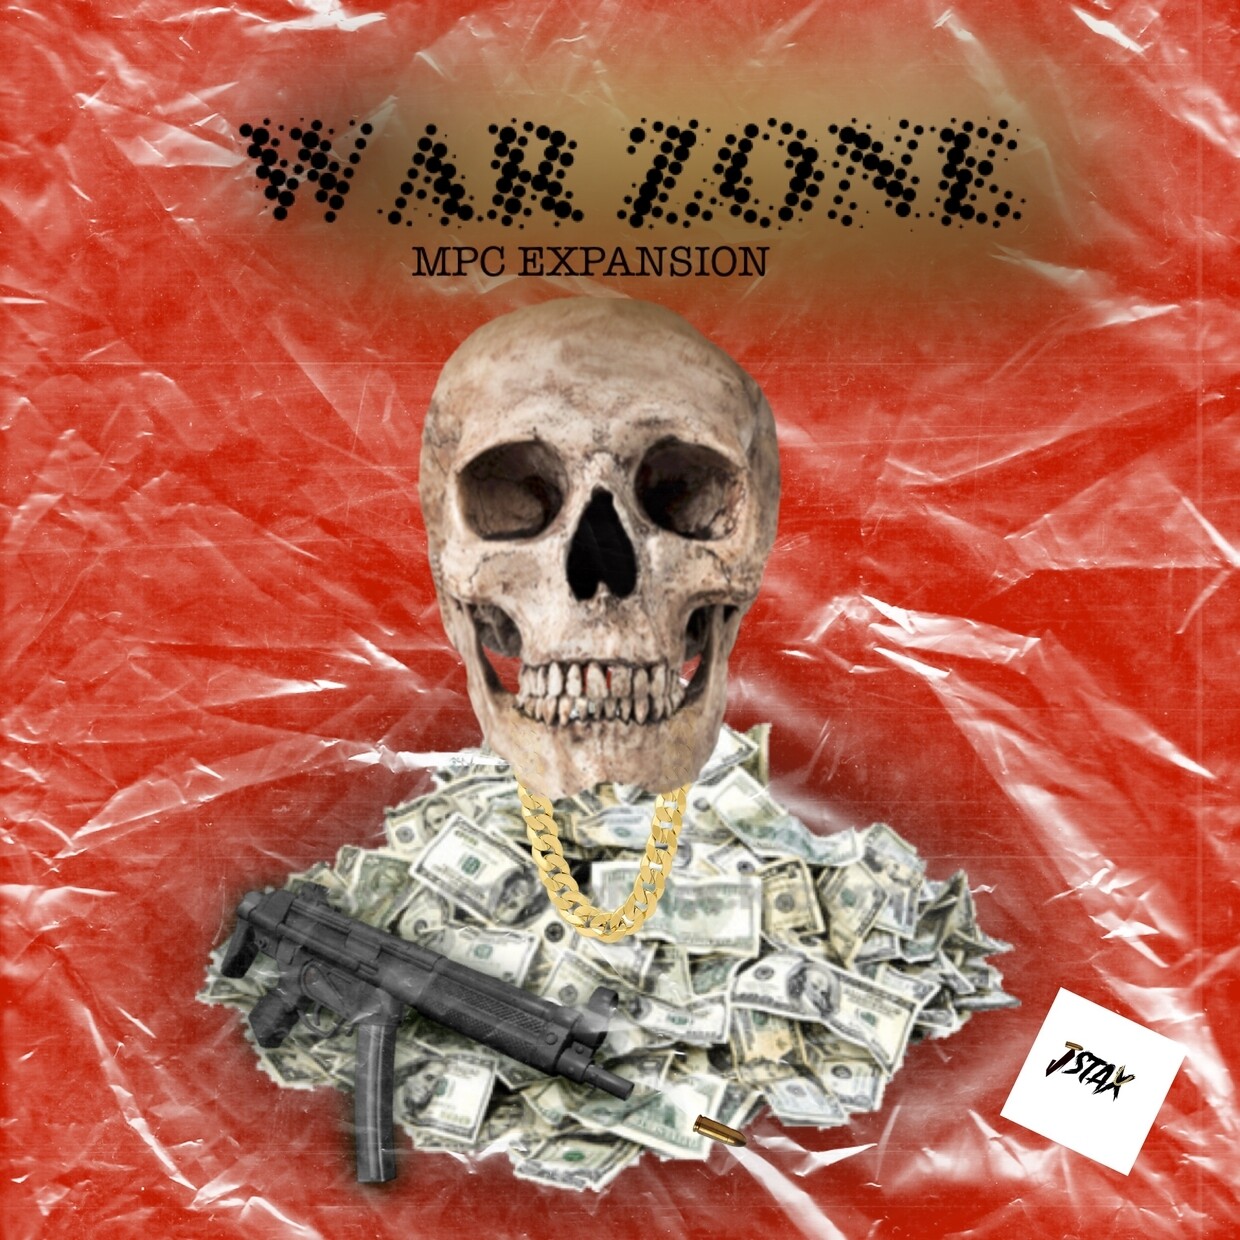 MPC EXPANSION 'WAR ZONE' by J-STAX